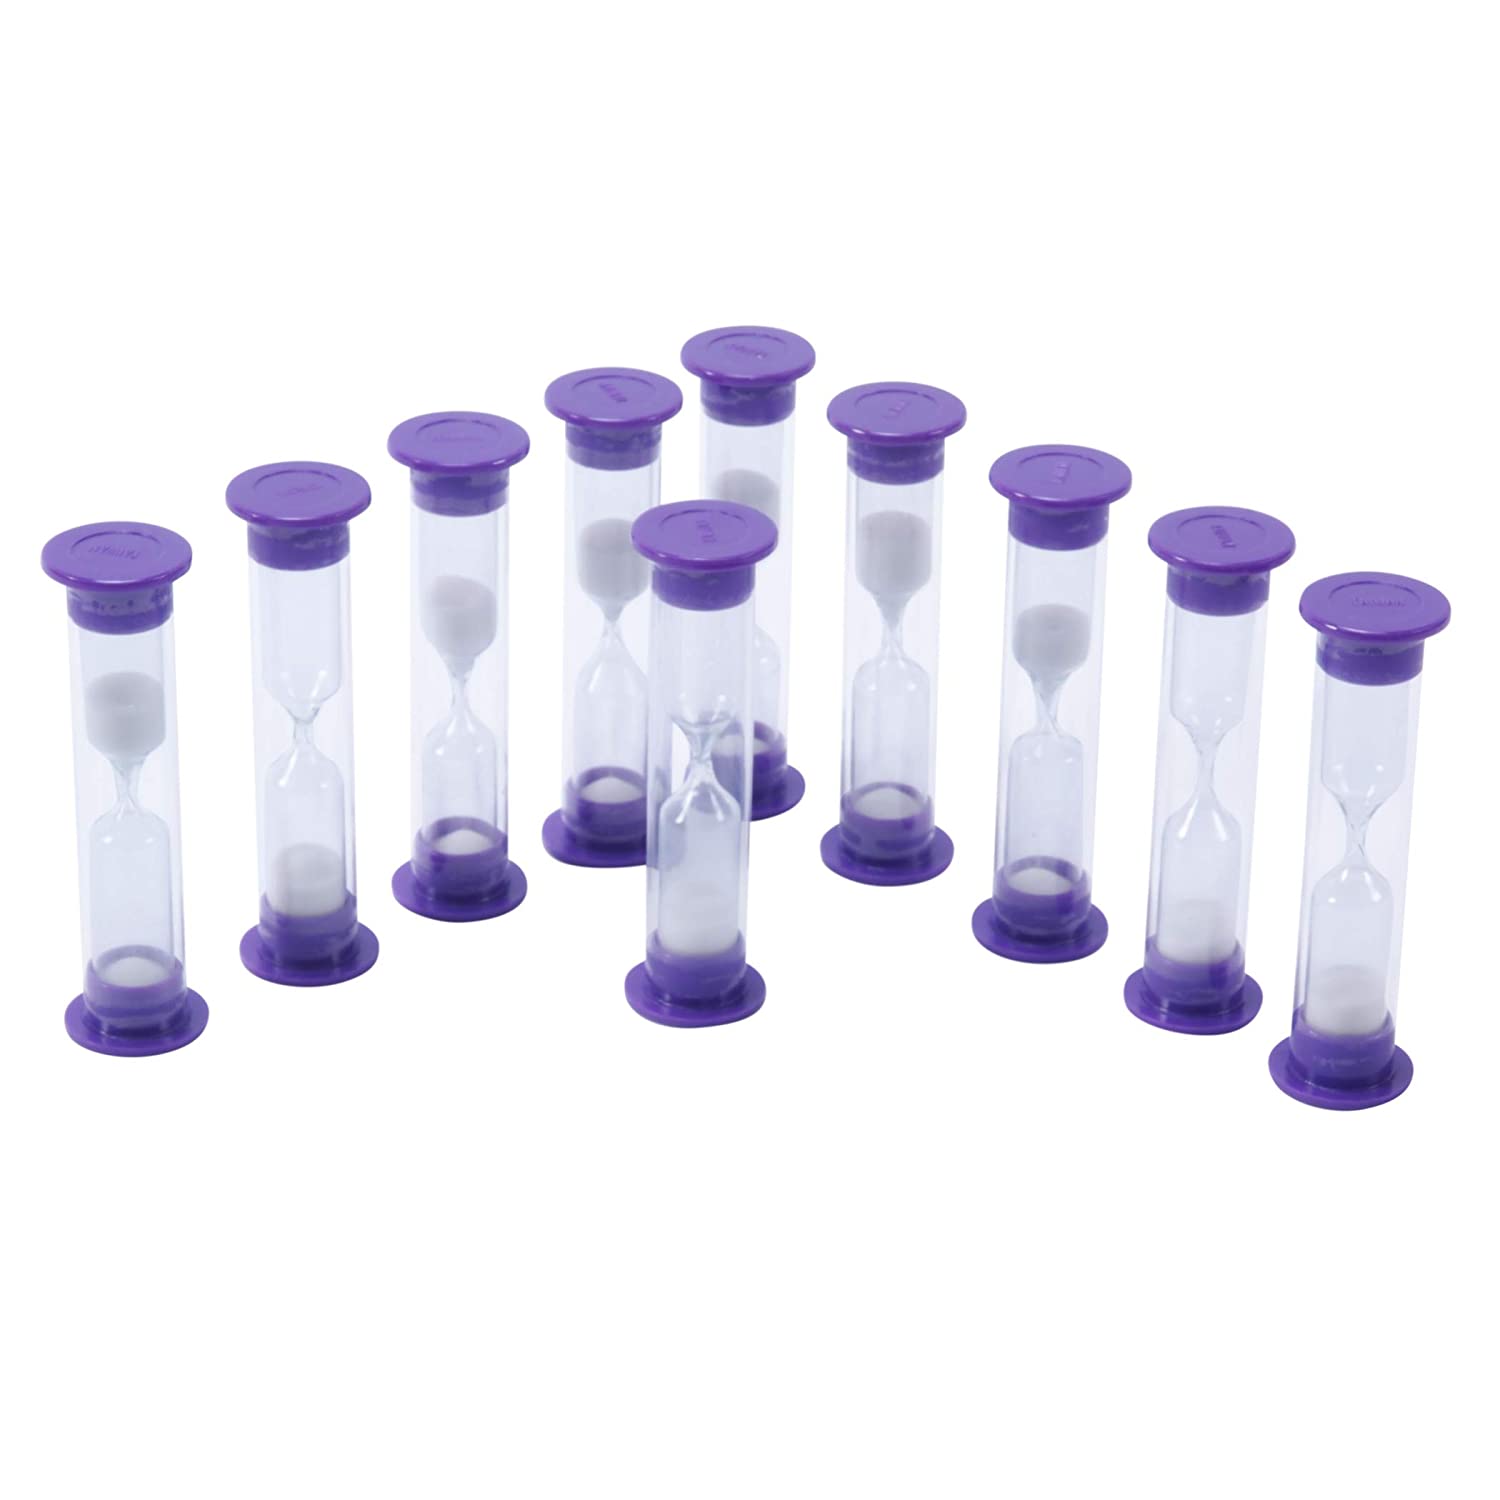 Learning Advantage 3 Minute Sand Timers, Set of 10 - 7626